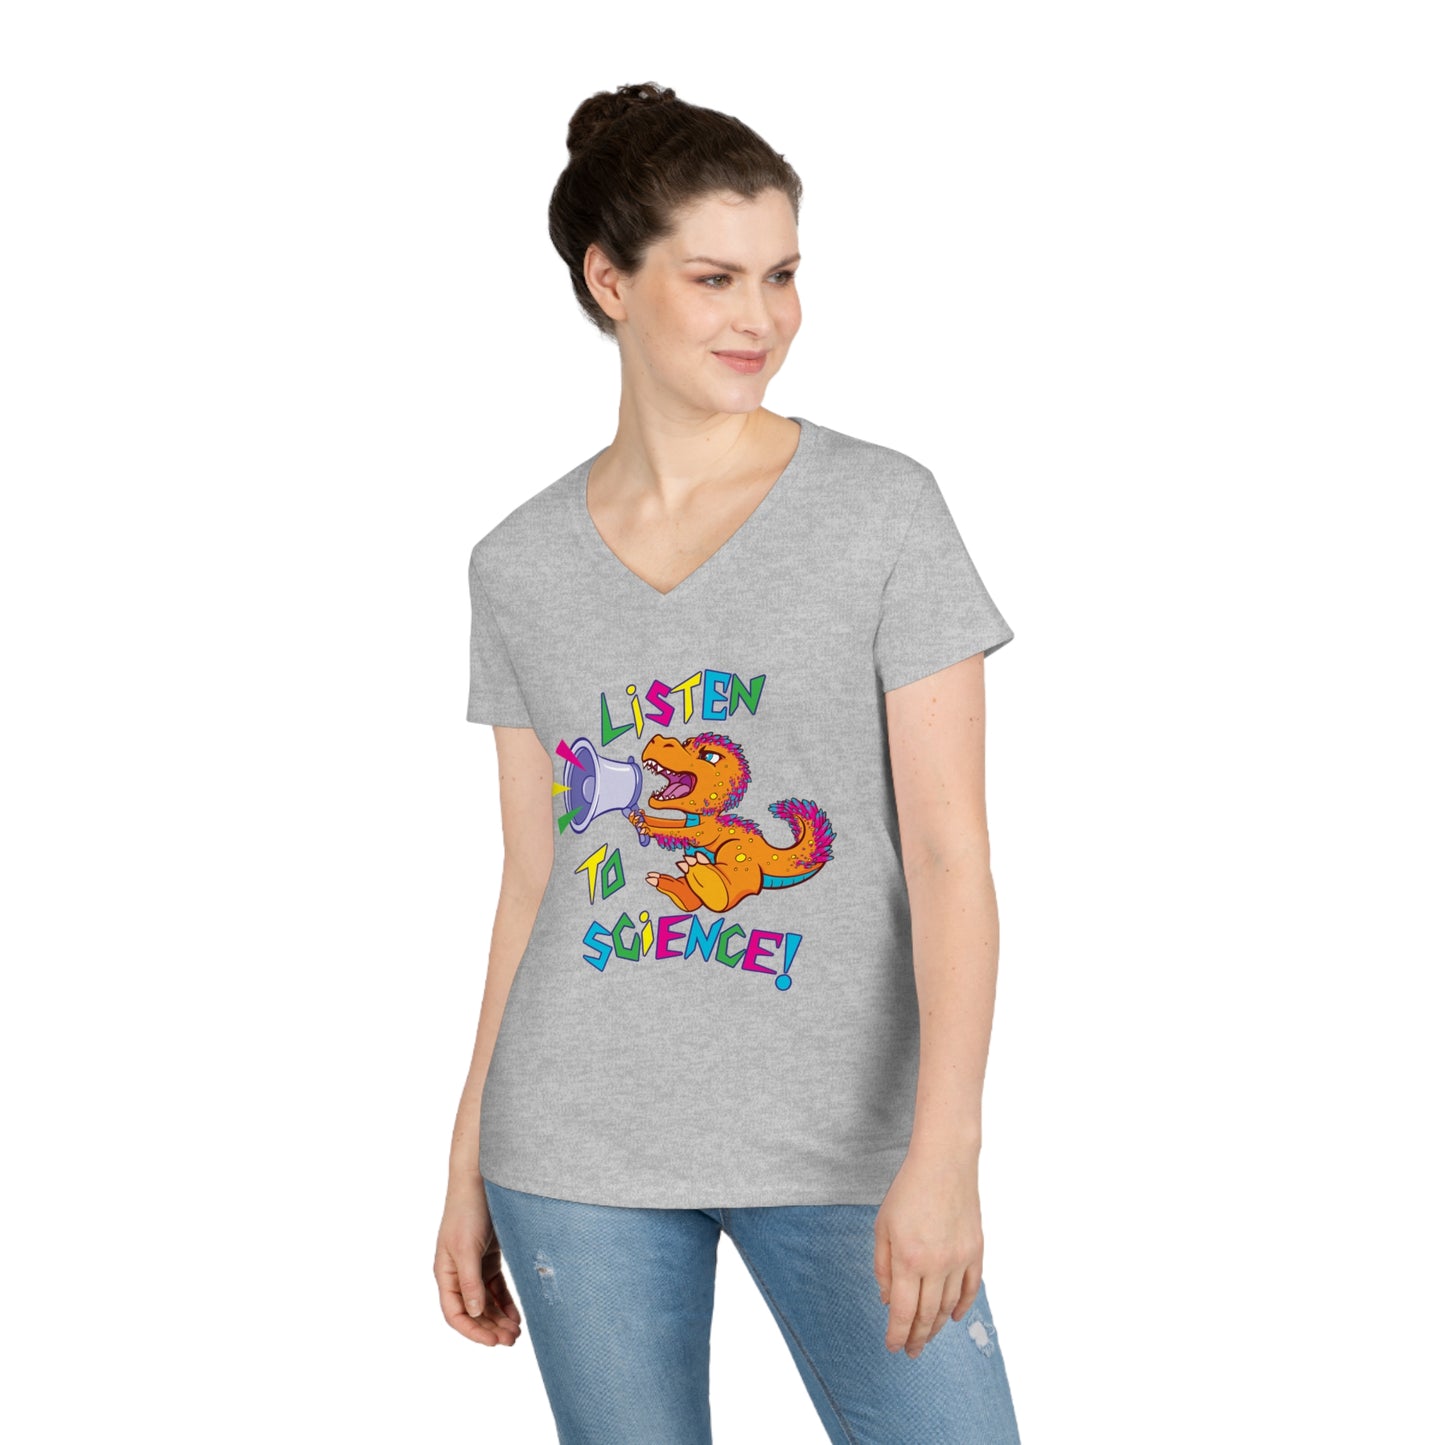 "Listen to Science" Ladies' V-Neck T-Shirt